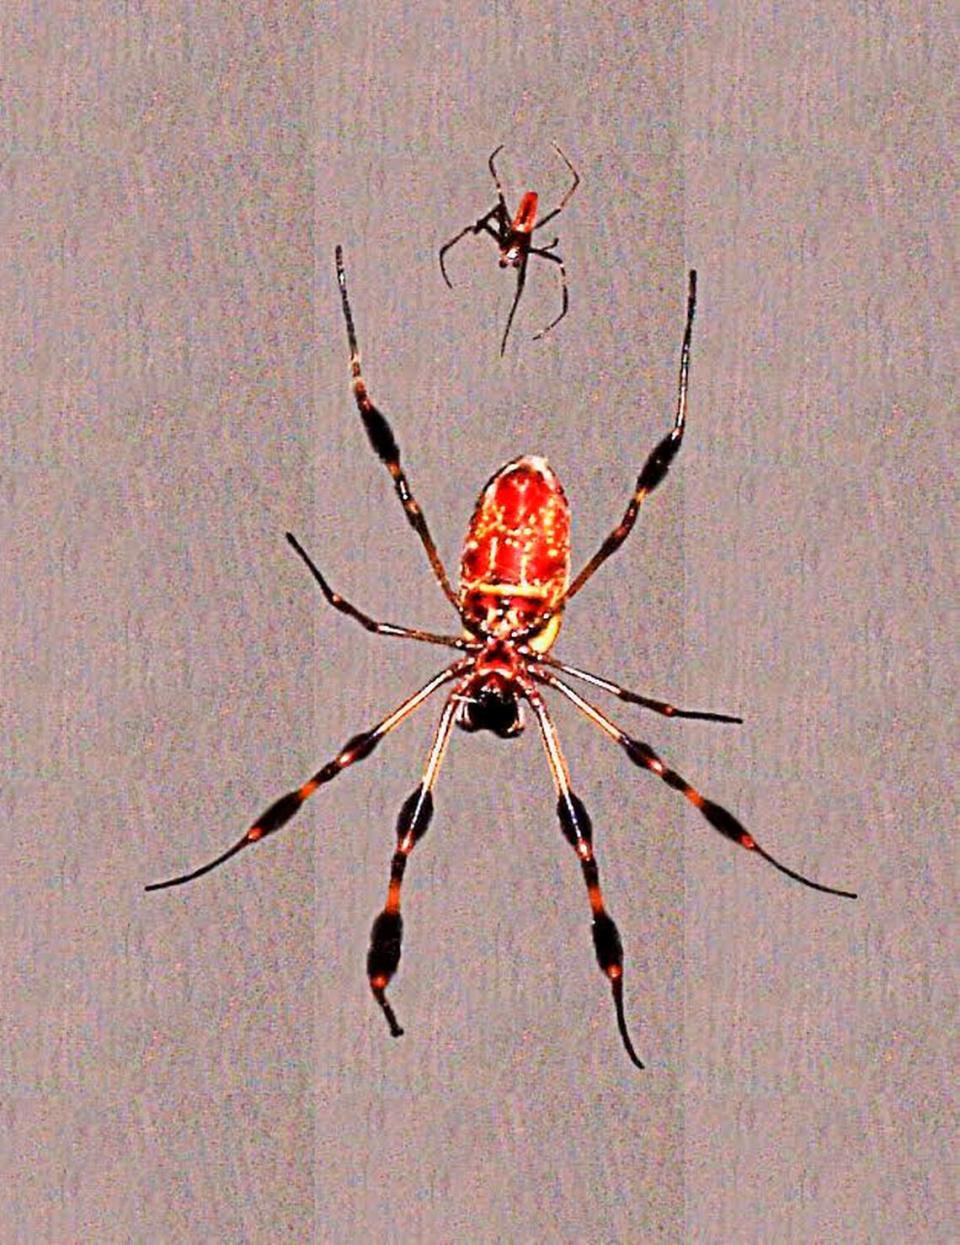 A female banana spider, at bottom, hangs in her web accompanied by a much smaller male. Males typically wait until the females are eating a trapped insect before attempting to mate, to reduce the chances of being consumed themselves.